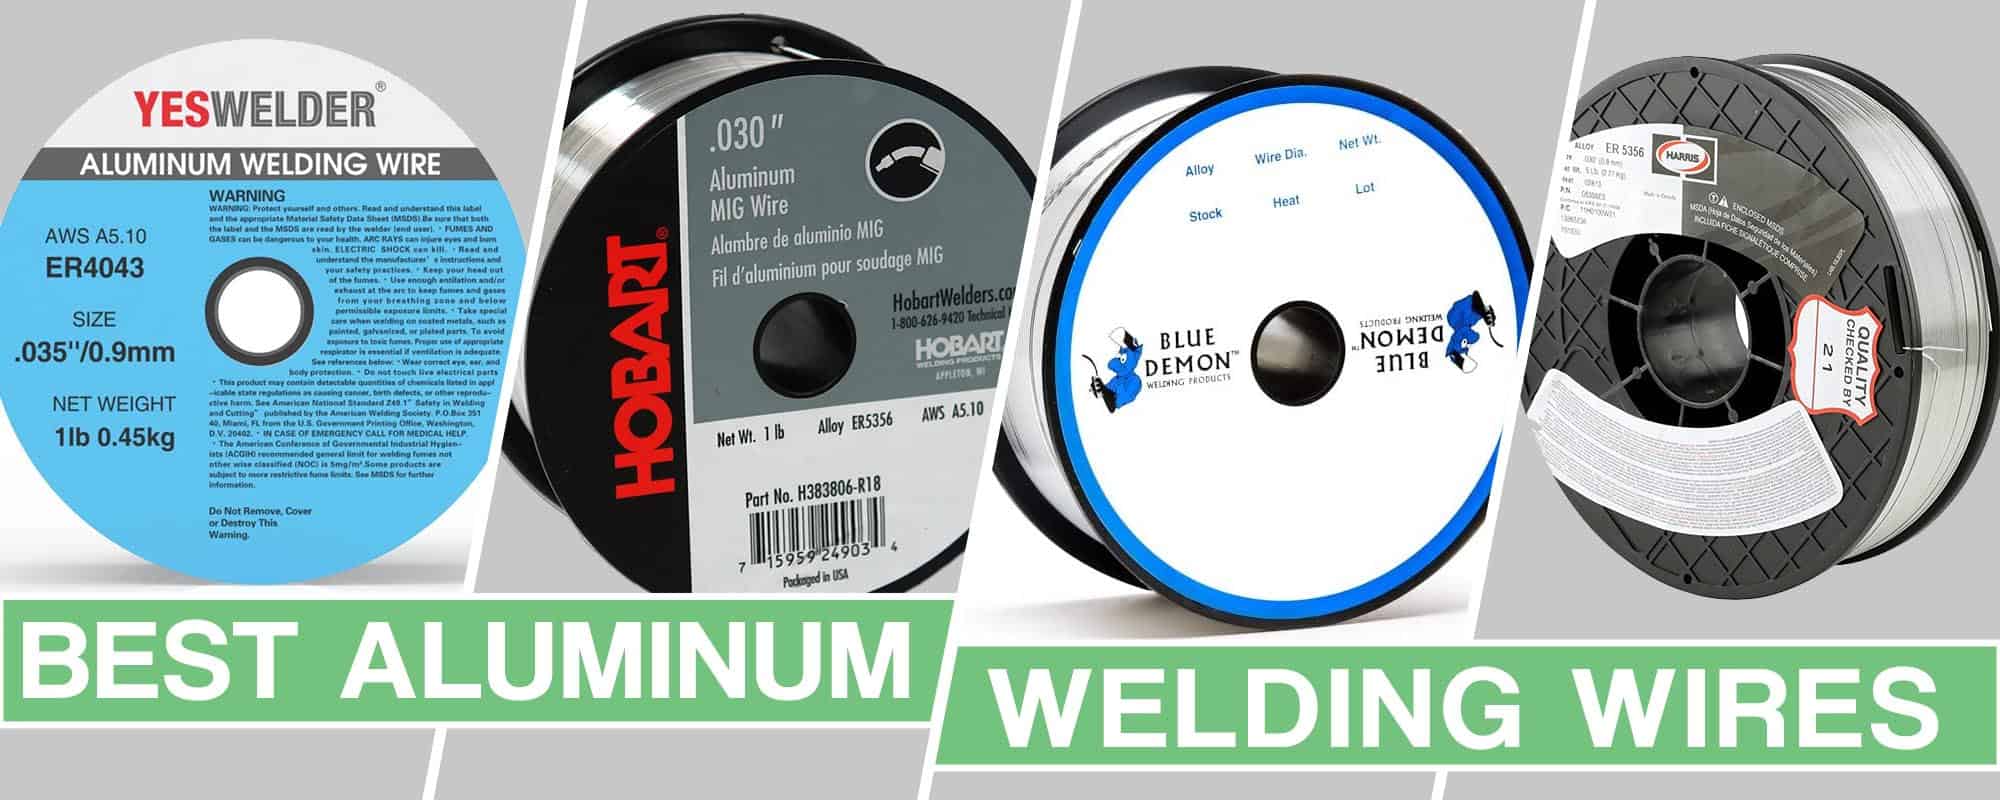 Feature image for Best aluminum welding wire article